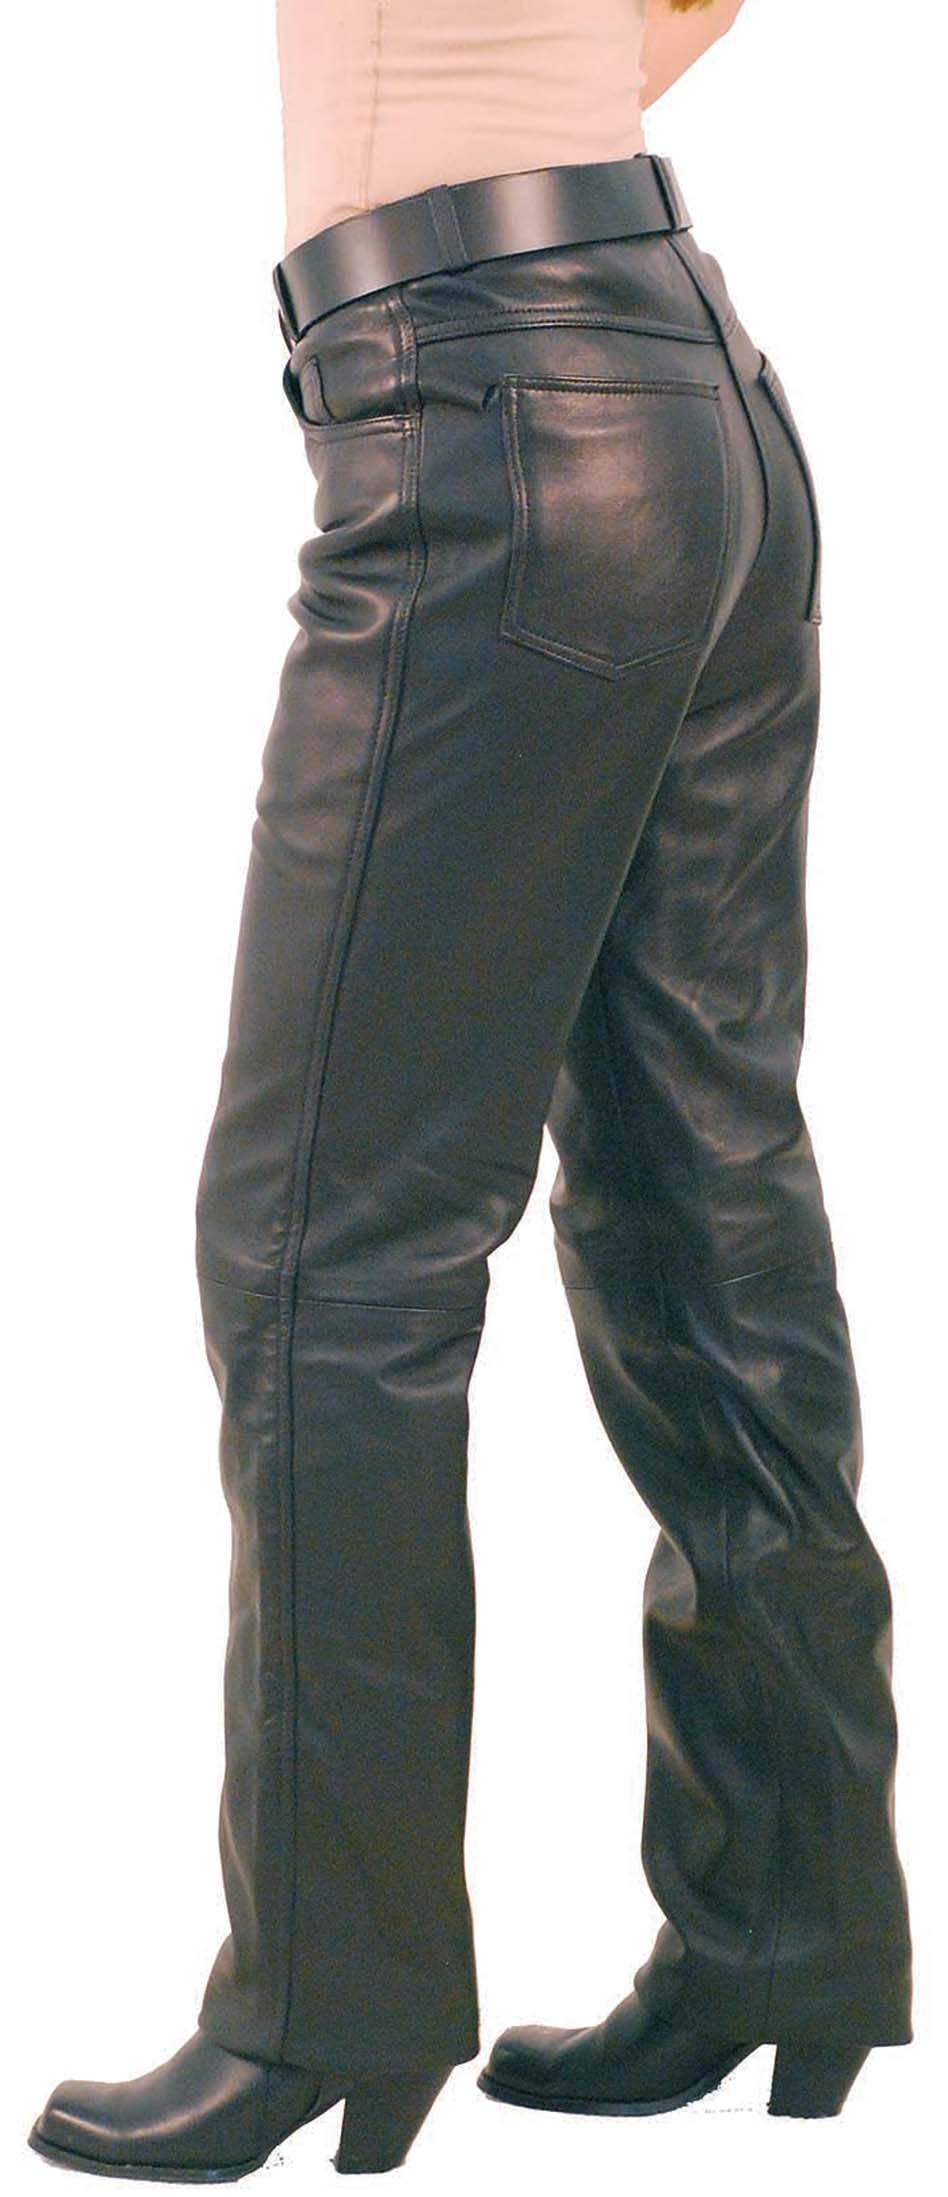 lady rider wearing classic womens leather pants